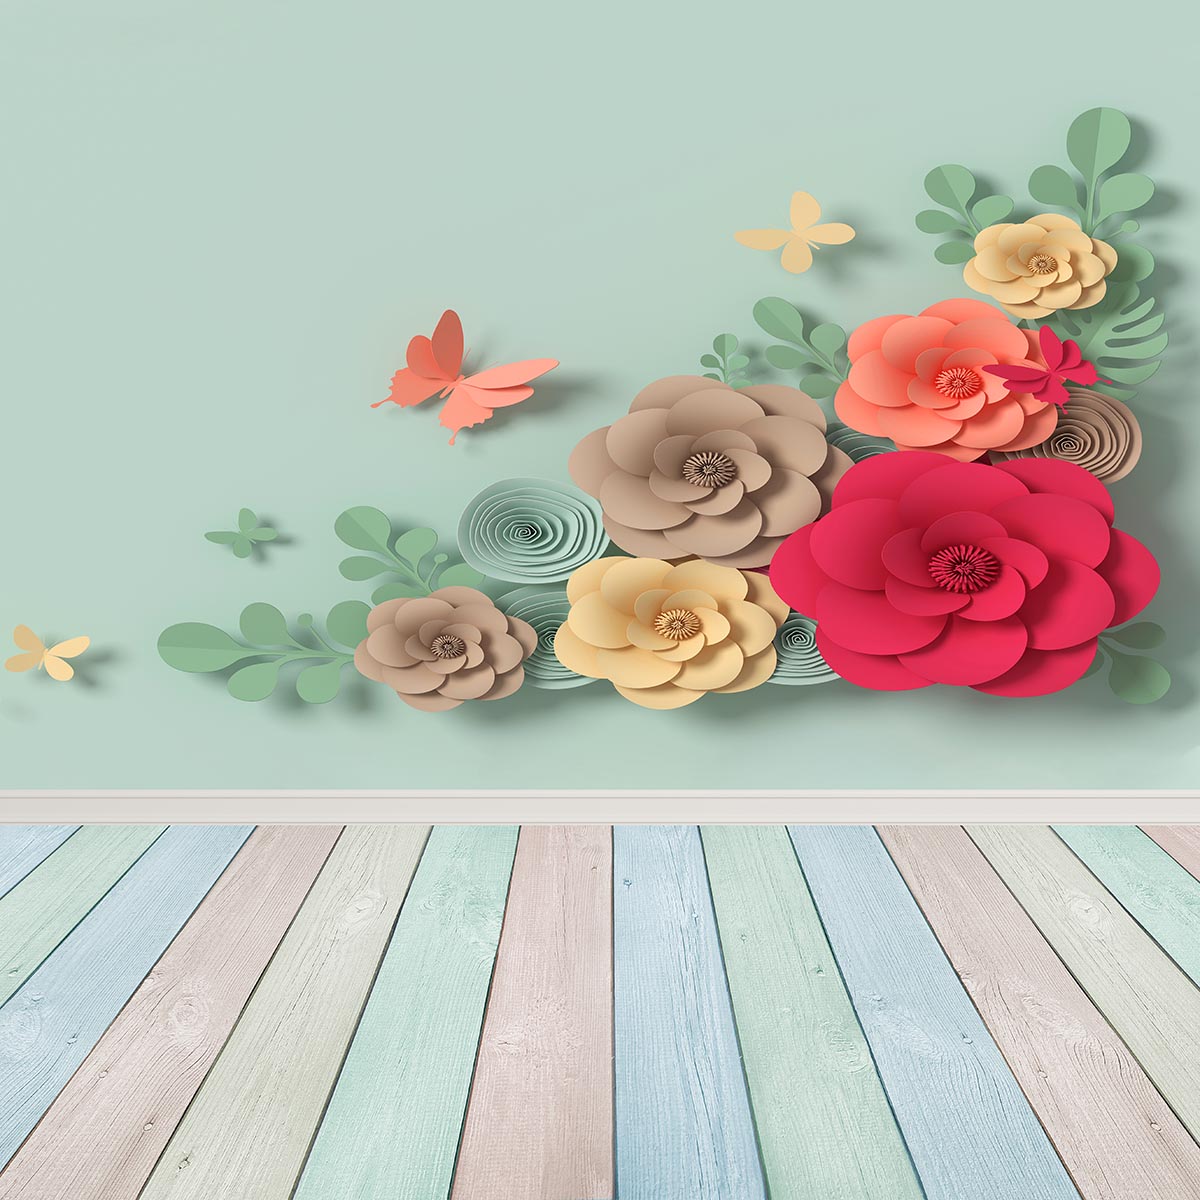 Mint Wall 3D Colorful Flowers Wood Floor Backdrop for Photography Prop